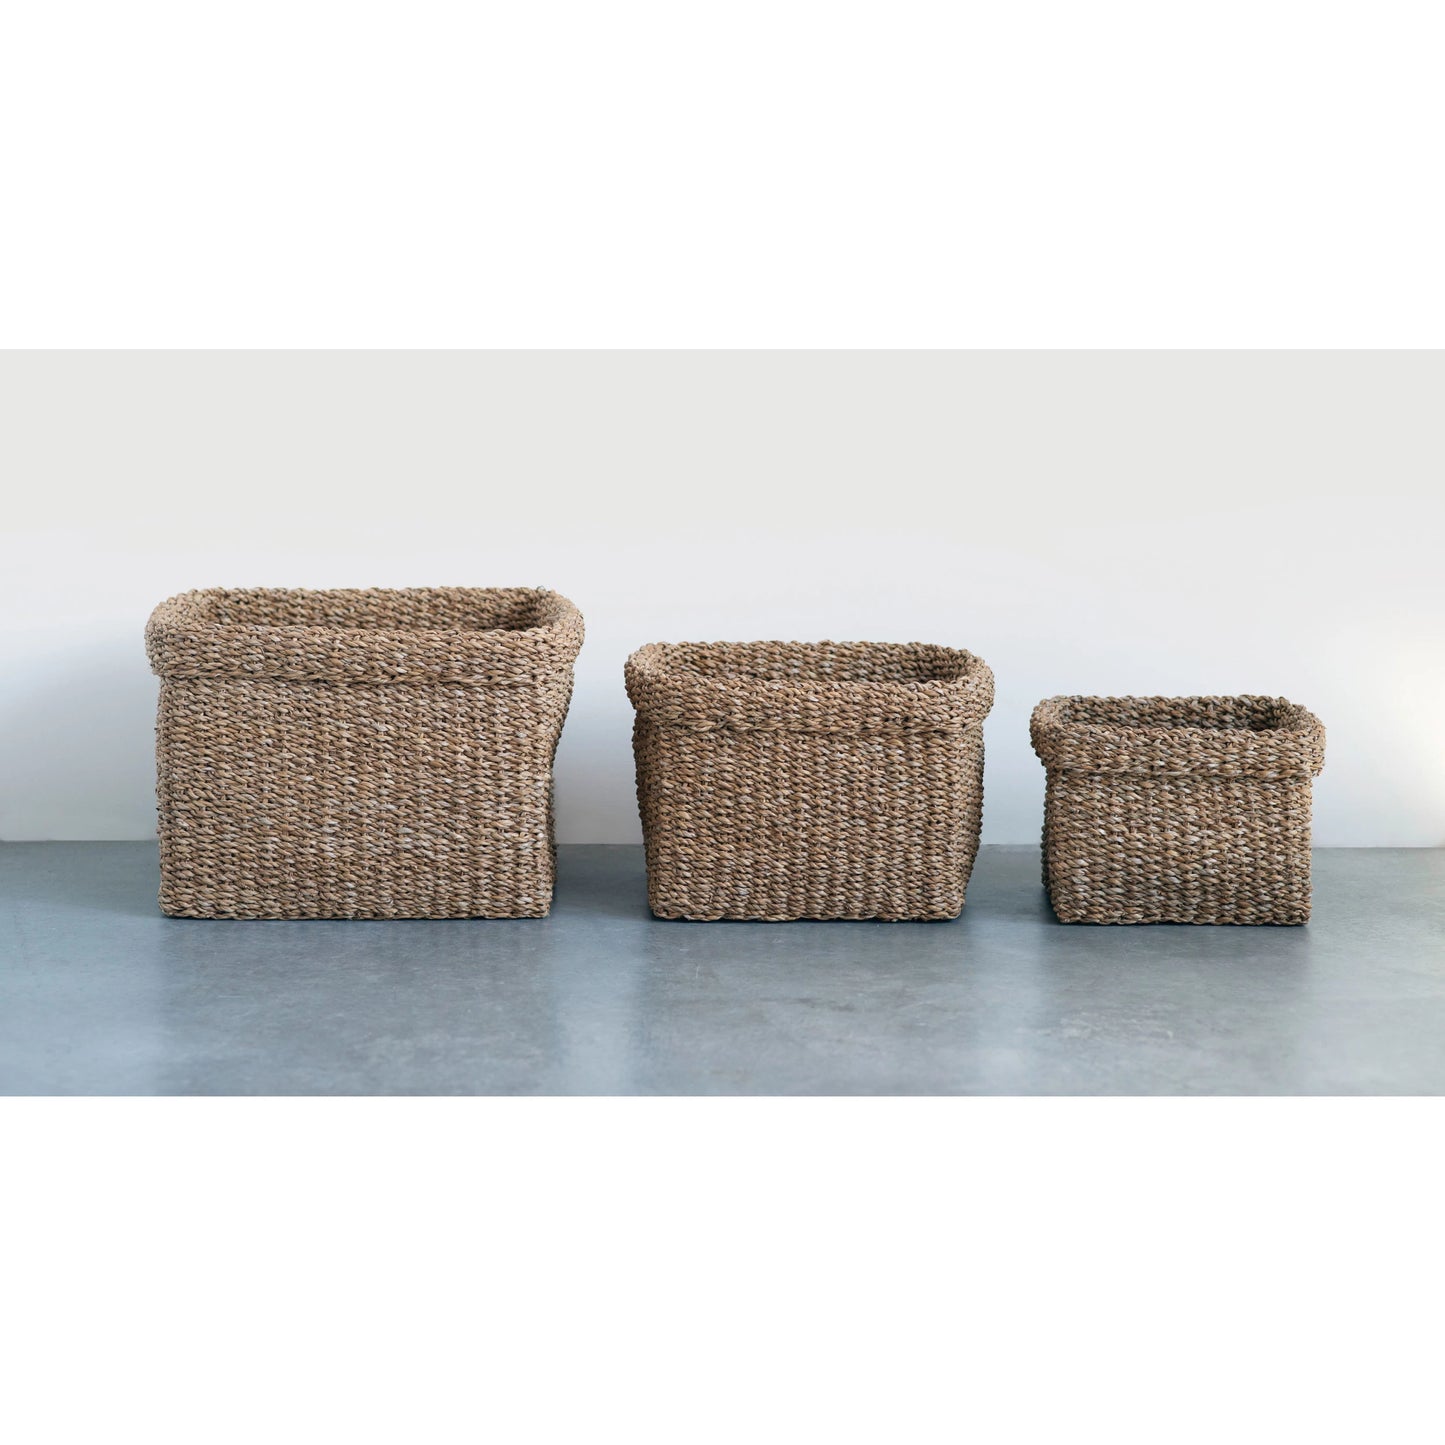 all three sizes of woven seagrass baskets displayed on a light gray surface against a white background